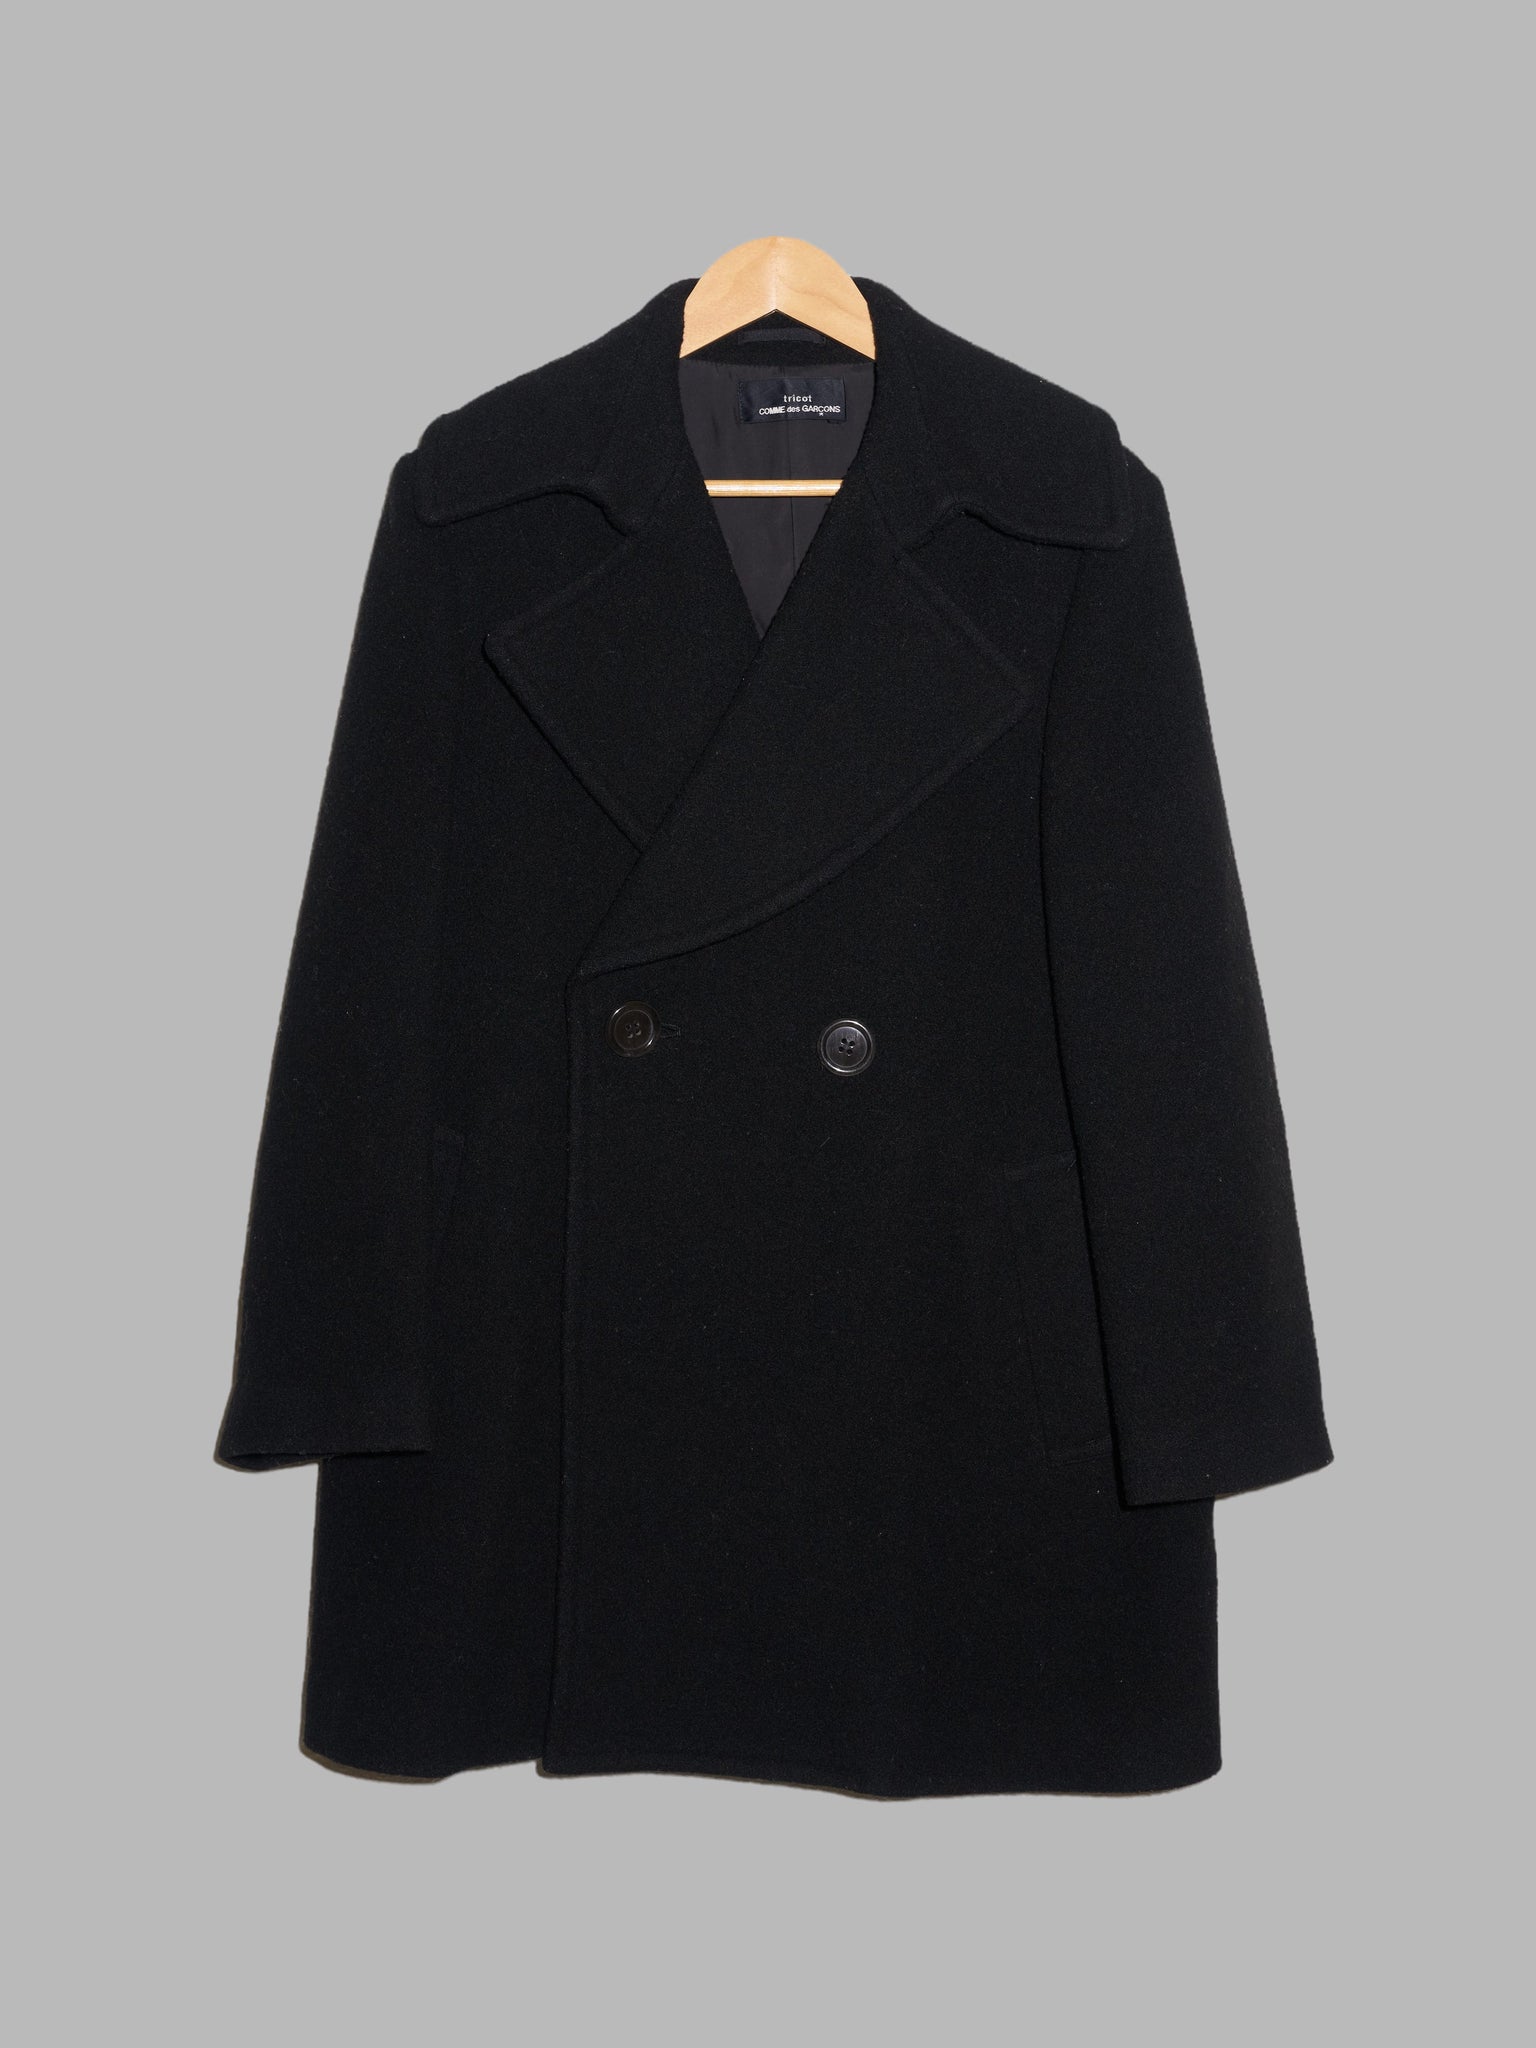 Moschino Normal But Formal 1990s black wool melton four button overcoat - L  M